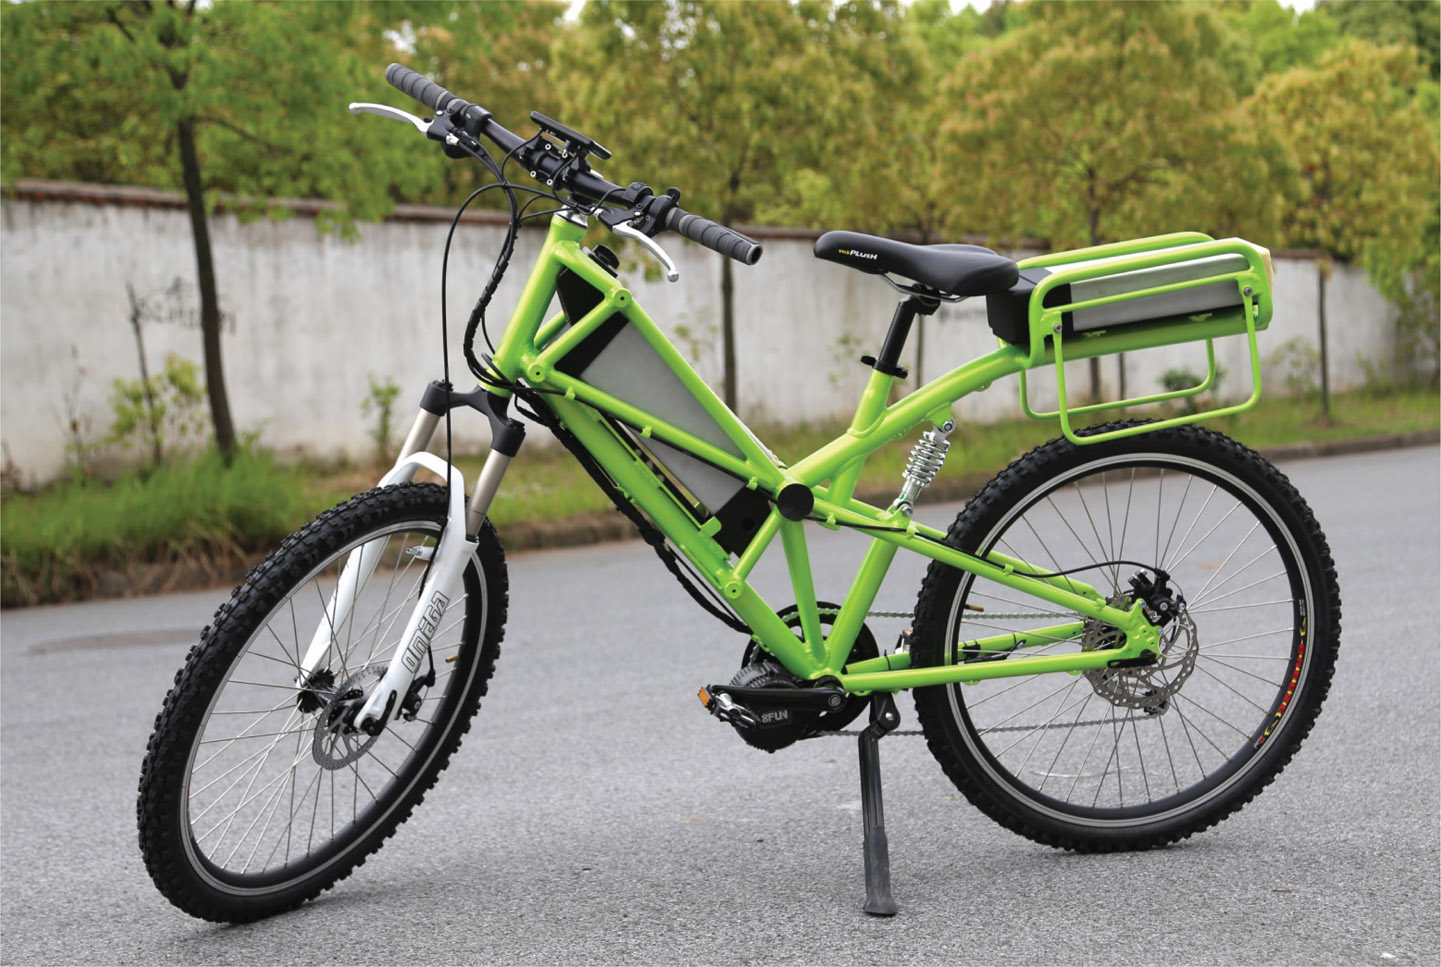 5.1 The ZEDbike can run for 50 to 70 km on one battery.